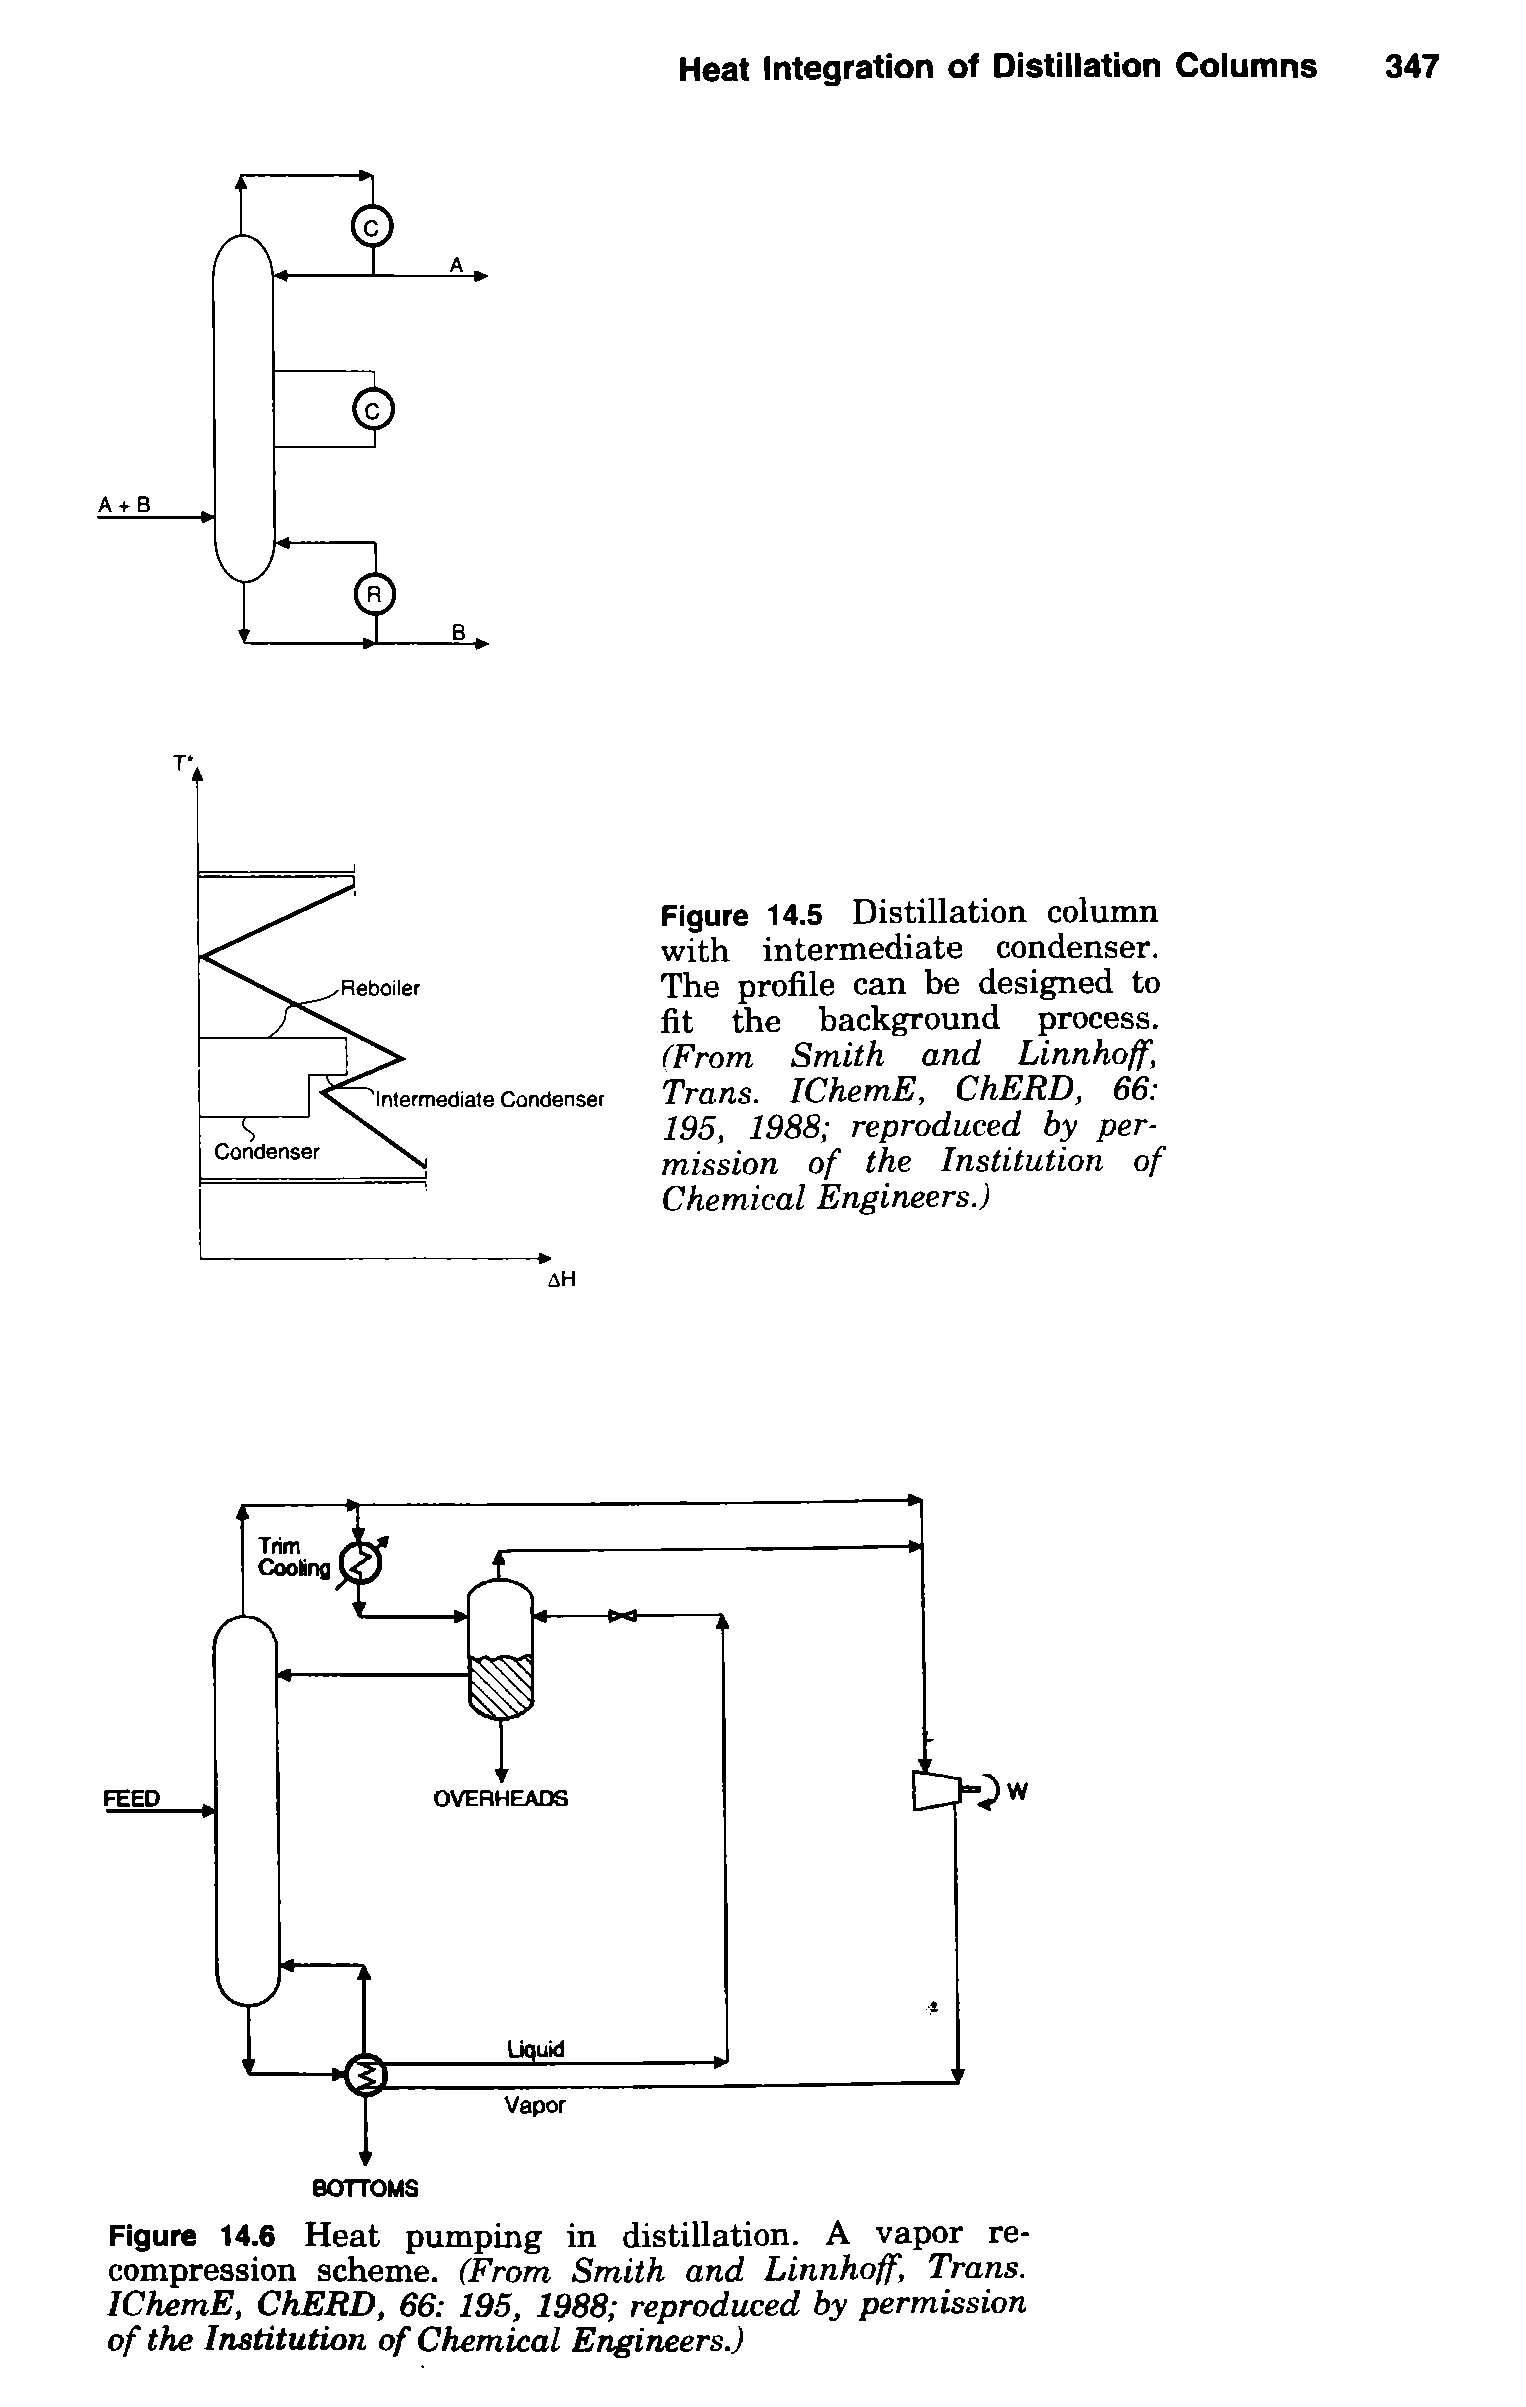 Figure 14.5 Distillation column with intermediate condenser. The profile can be designed to fit the background process. (From Smith and Linnhoff, Trans. IChemE, ChERD, 66 195, 1988 reproduced by permission of the Institution of Chemical Engineers.)...